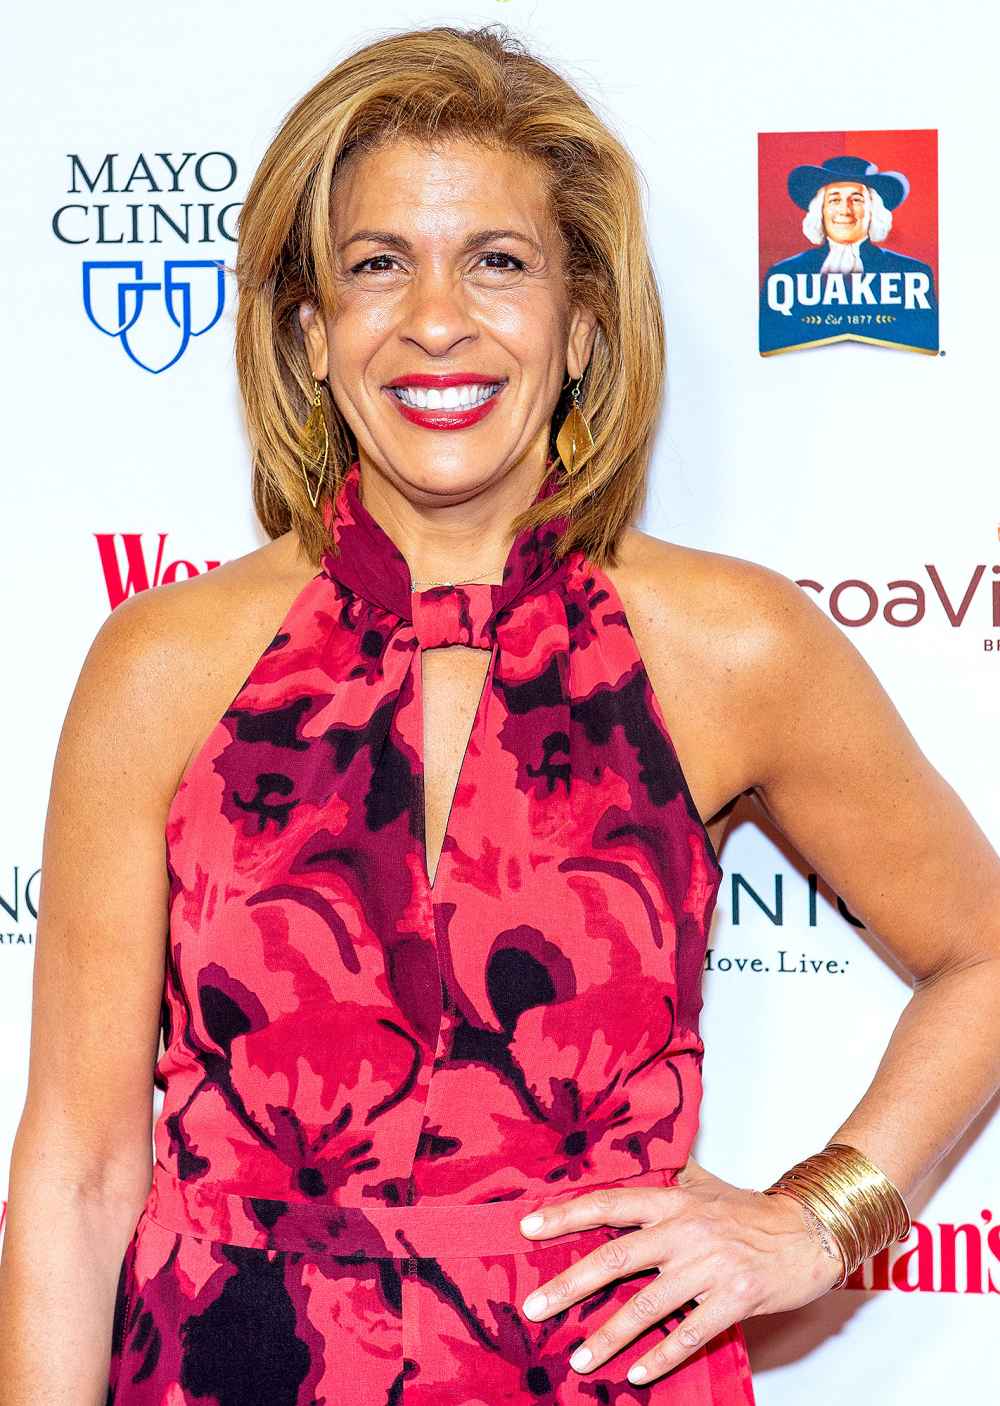 Hoda Kotb attends the 14th annual Woman's Day Red Dress Awards at Jazz at Lincoln Center on February 7, 2017 in New York City.